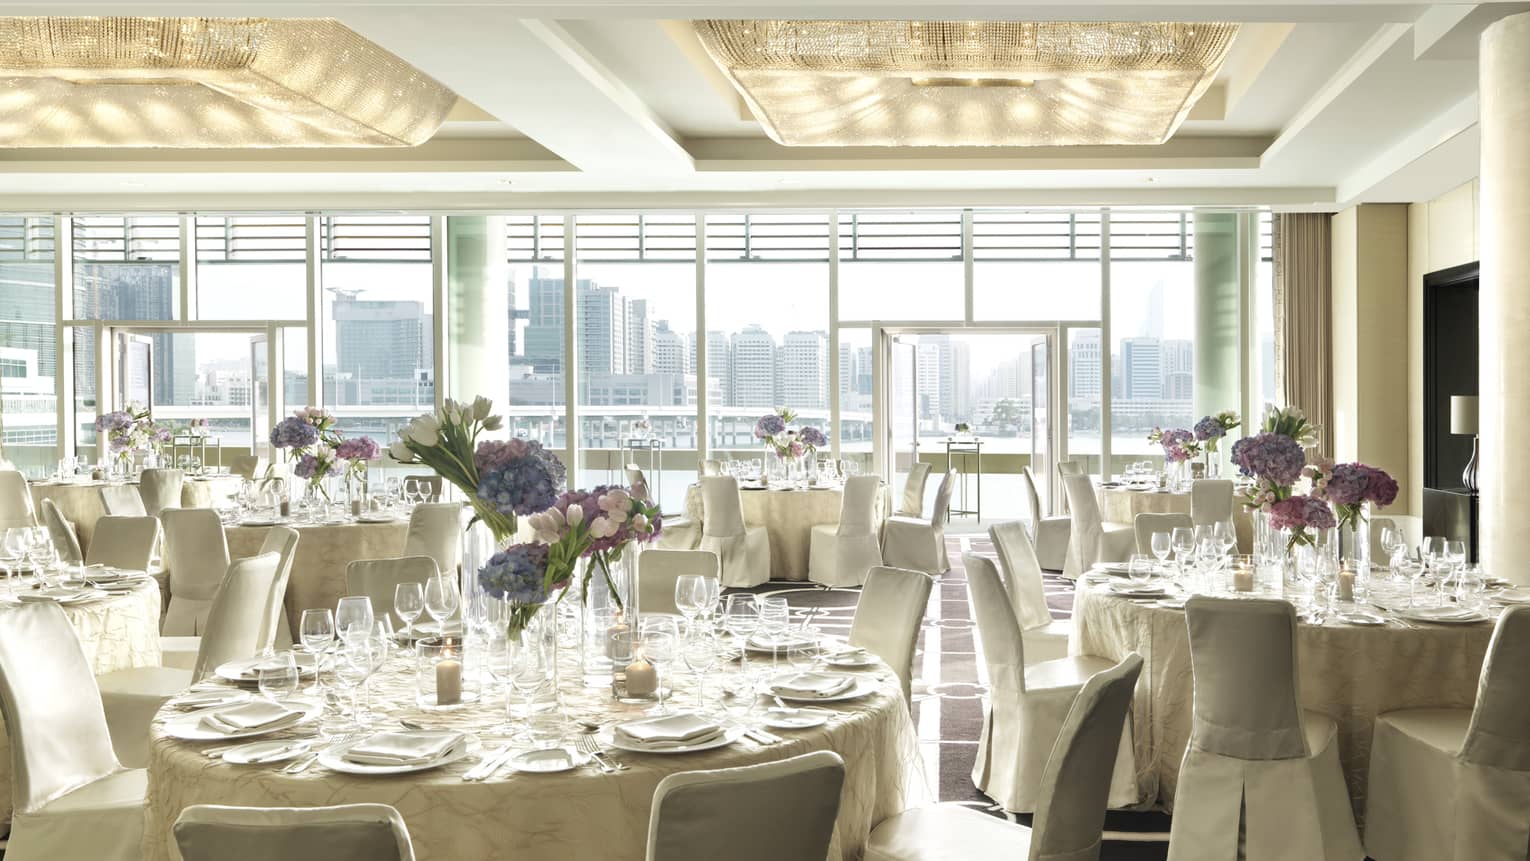 Sunny Liwa Ballroom with floor-to-ceiling window, round banquet tables with white linens, chairs 